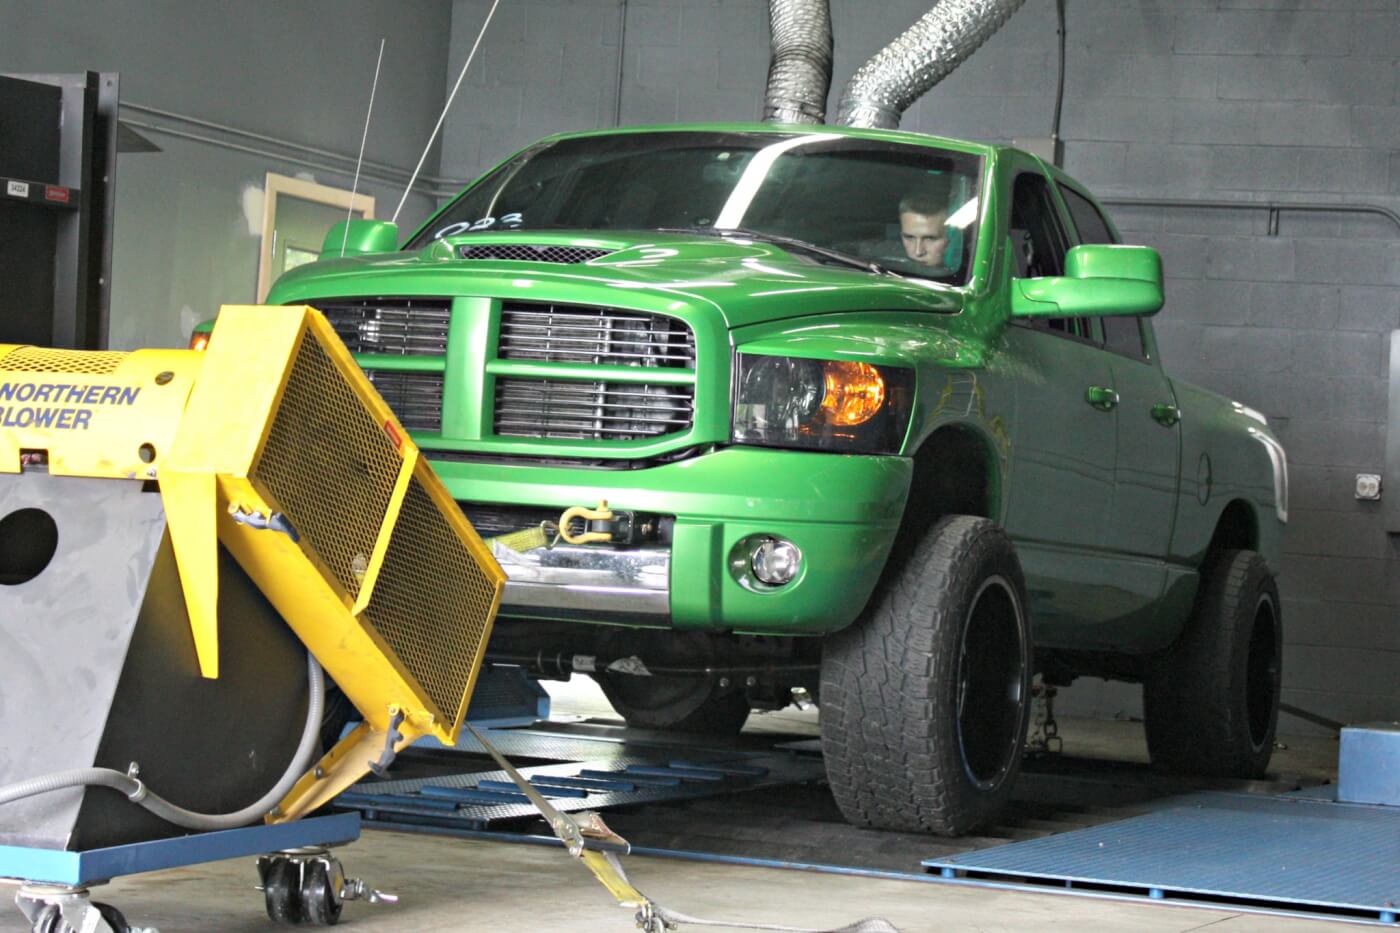  While the CPS dyno has been known to be a bit of a heartbreaker, Justin Lilley’s big green Cummins had no problems pushing right past that 800-hp mark to bring home 2nd place out of over 30 trucks on the day with 828hp and 1341fl-bs of torque.